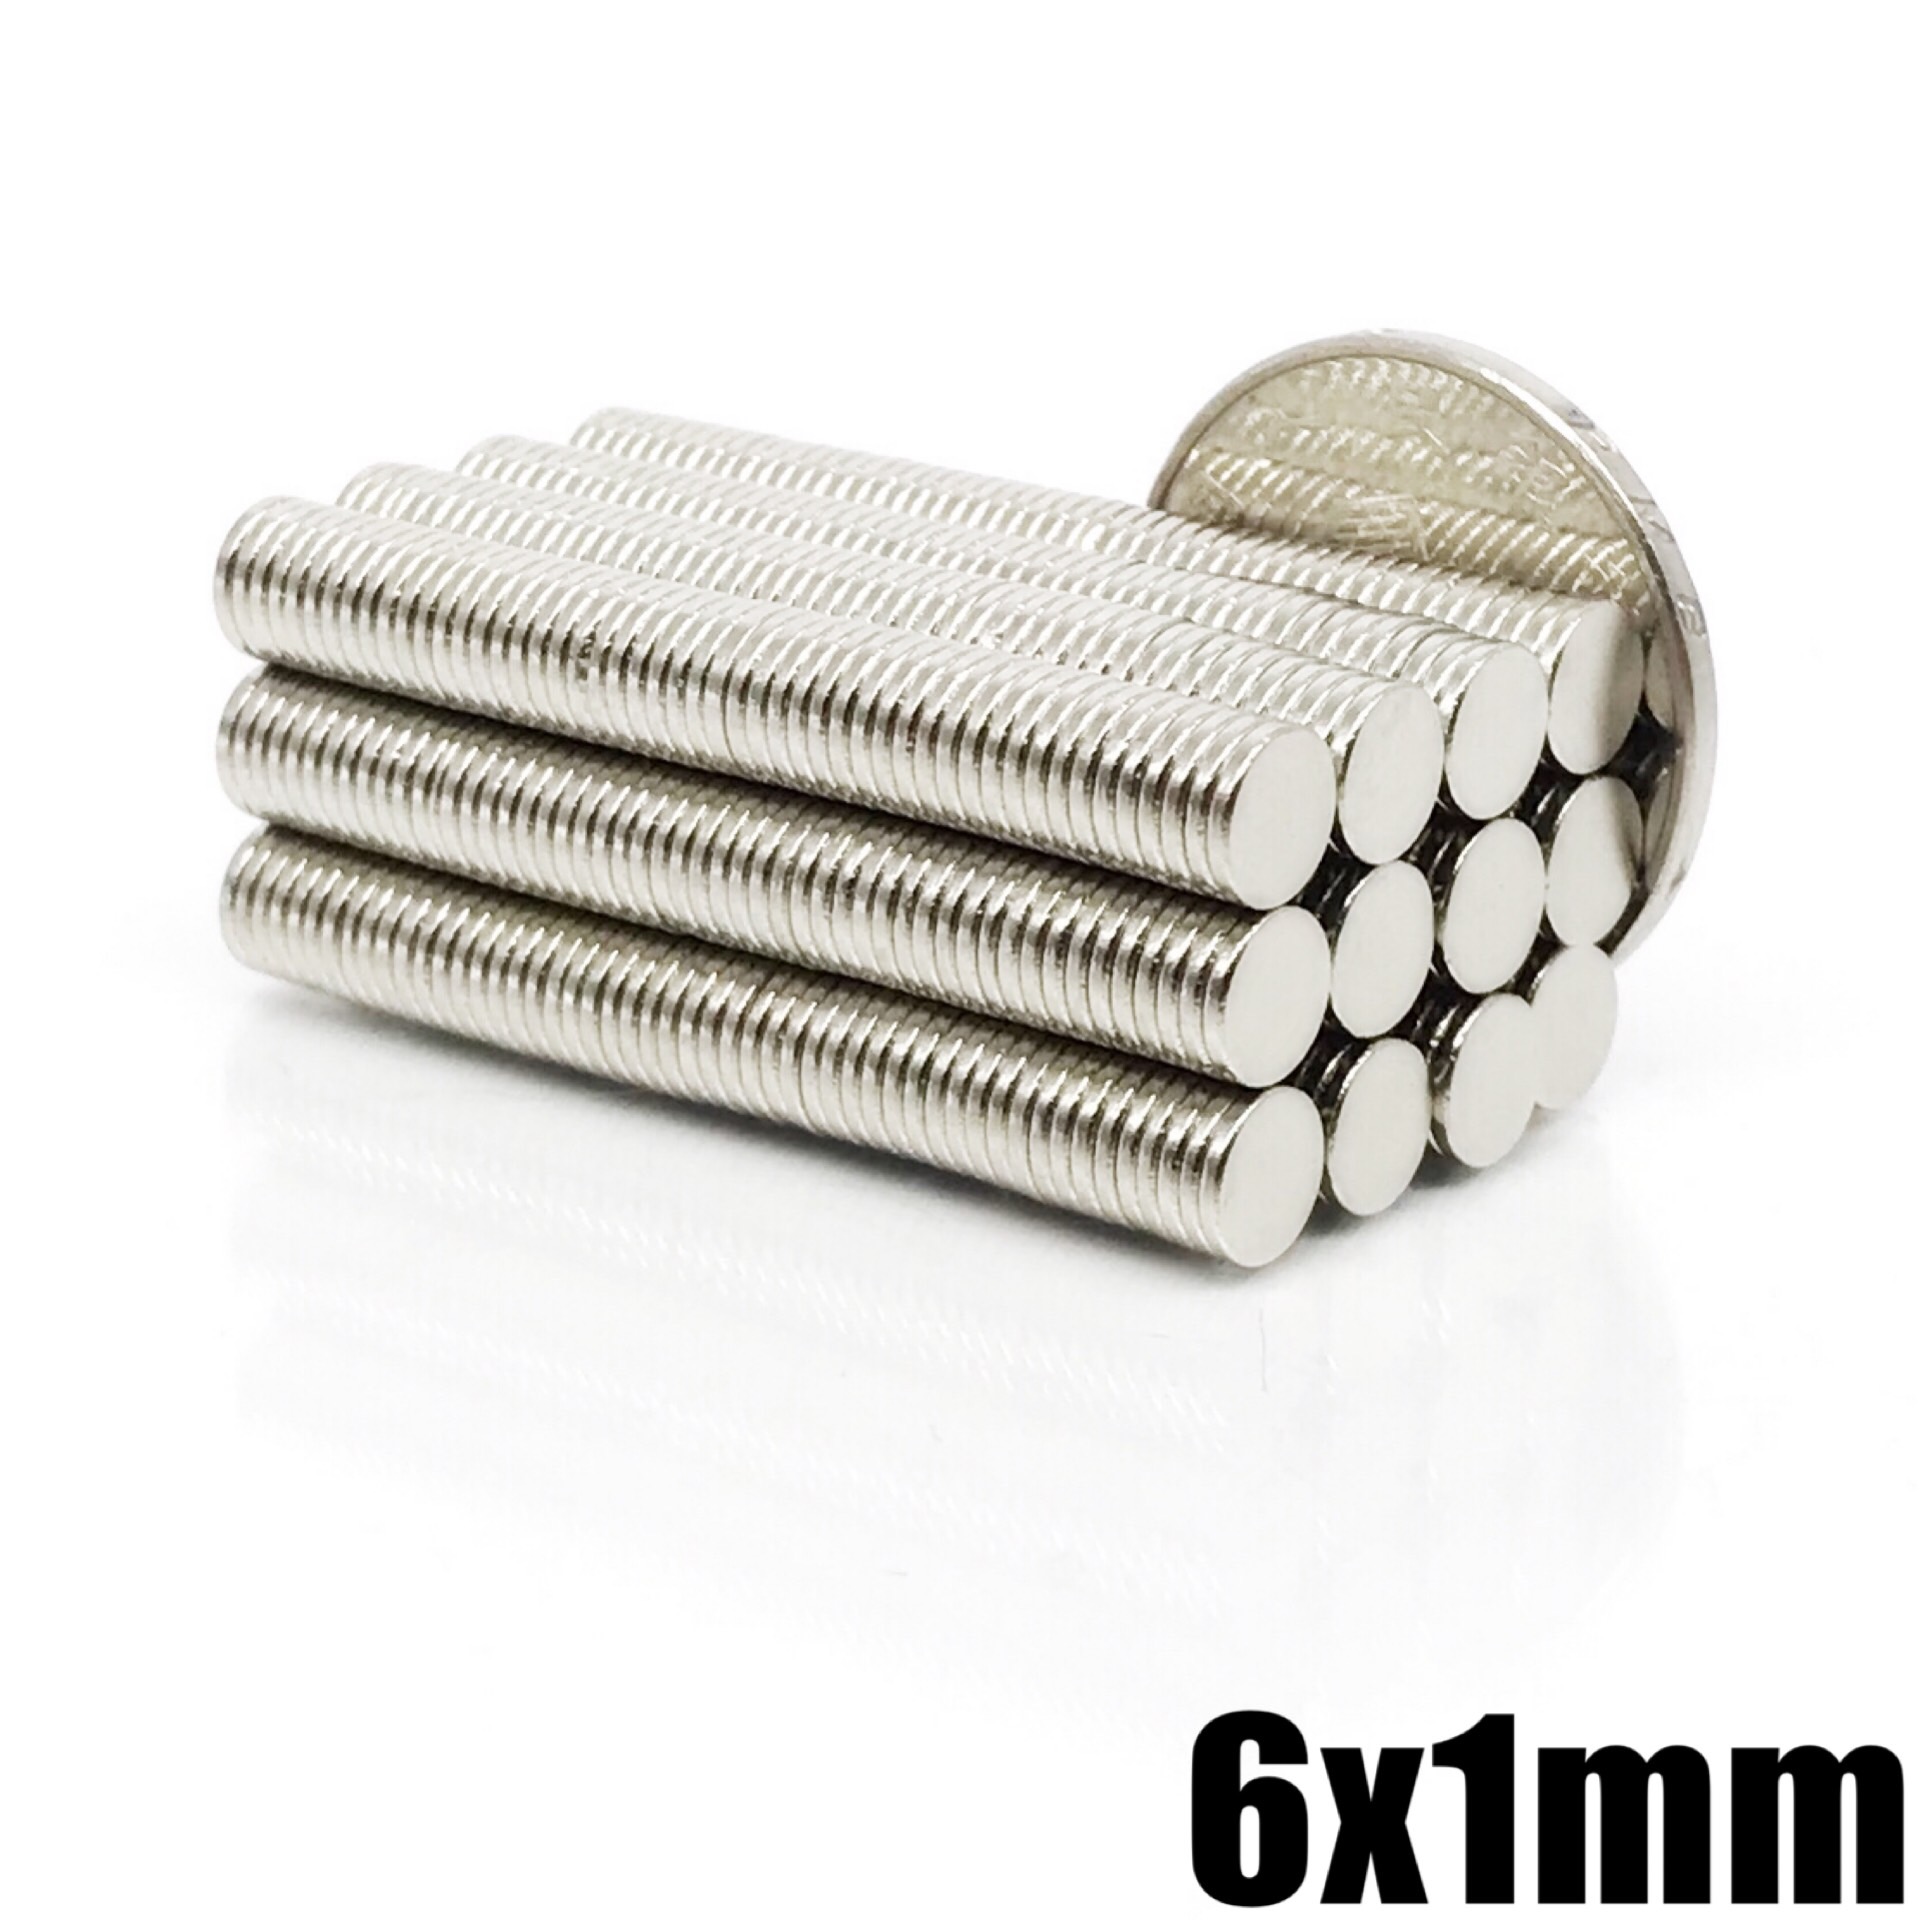 50-100PCS 7 x 1 mm Round Cylinder Disc Magnets N50 Rare Earth Neodymium Strong 